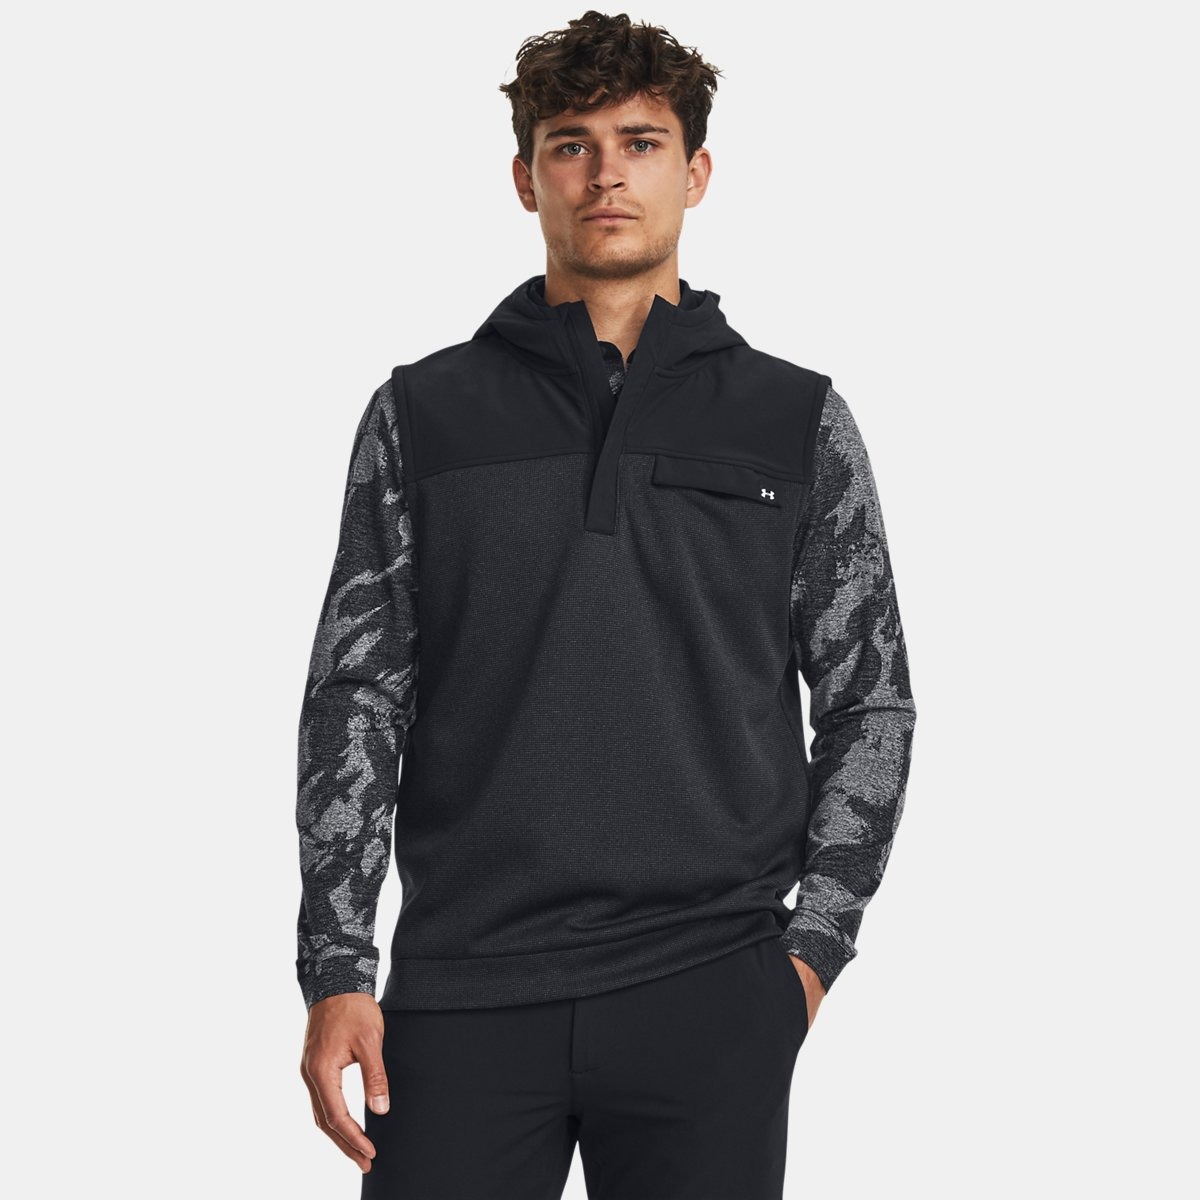 Black Vest for Man from Under Armour GOOFASH